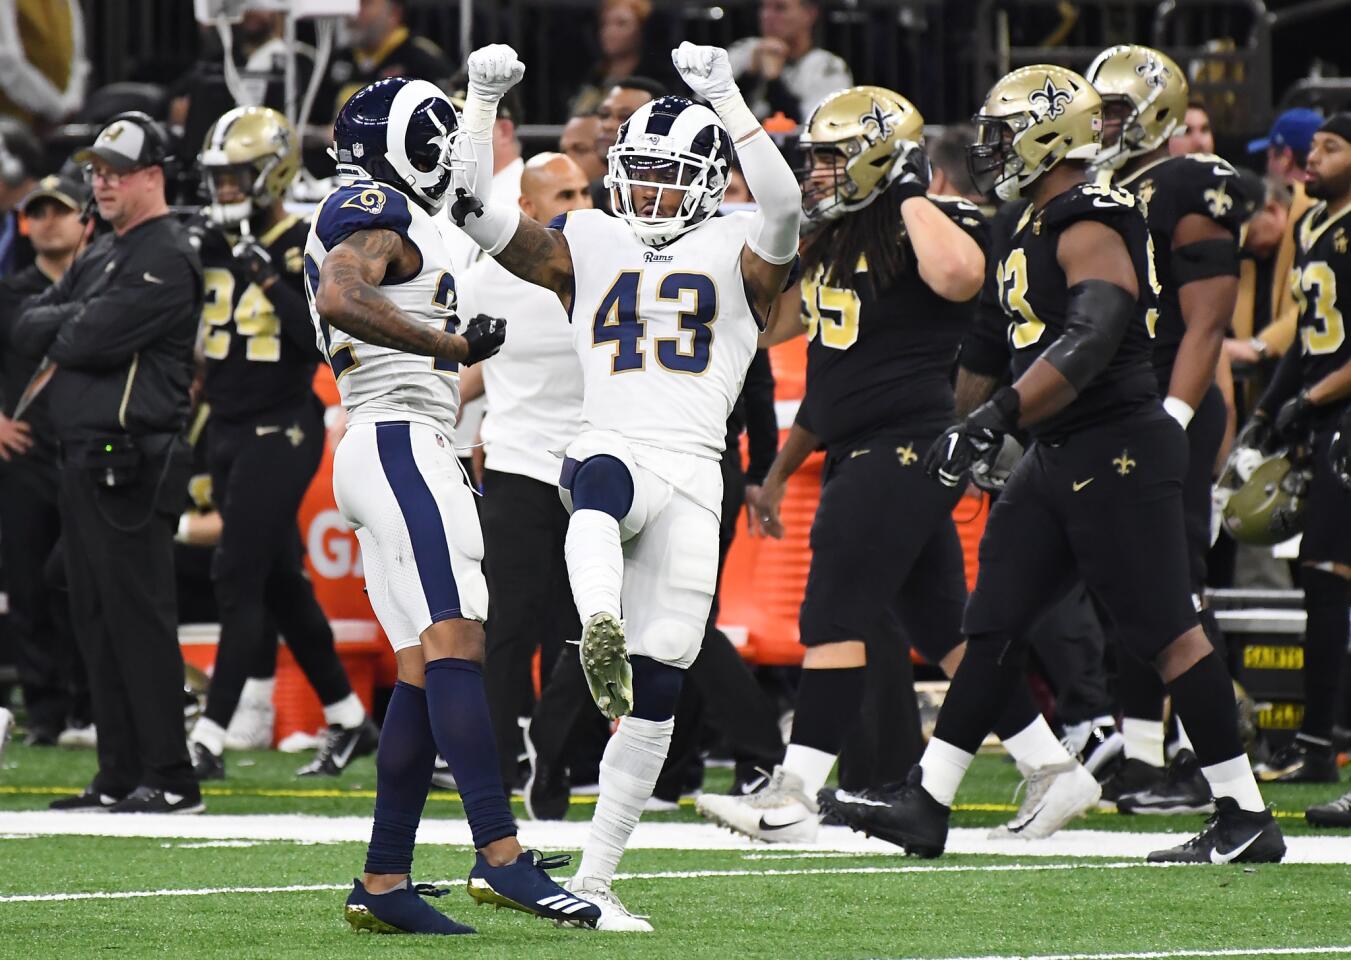 Rams safety John Johnson (43) celebrates his interception against the New Orleans Saints in overtime in the NFC Championship at the Superdome in New Orleans Sunday.